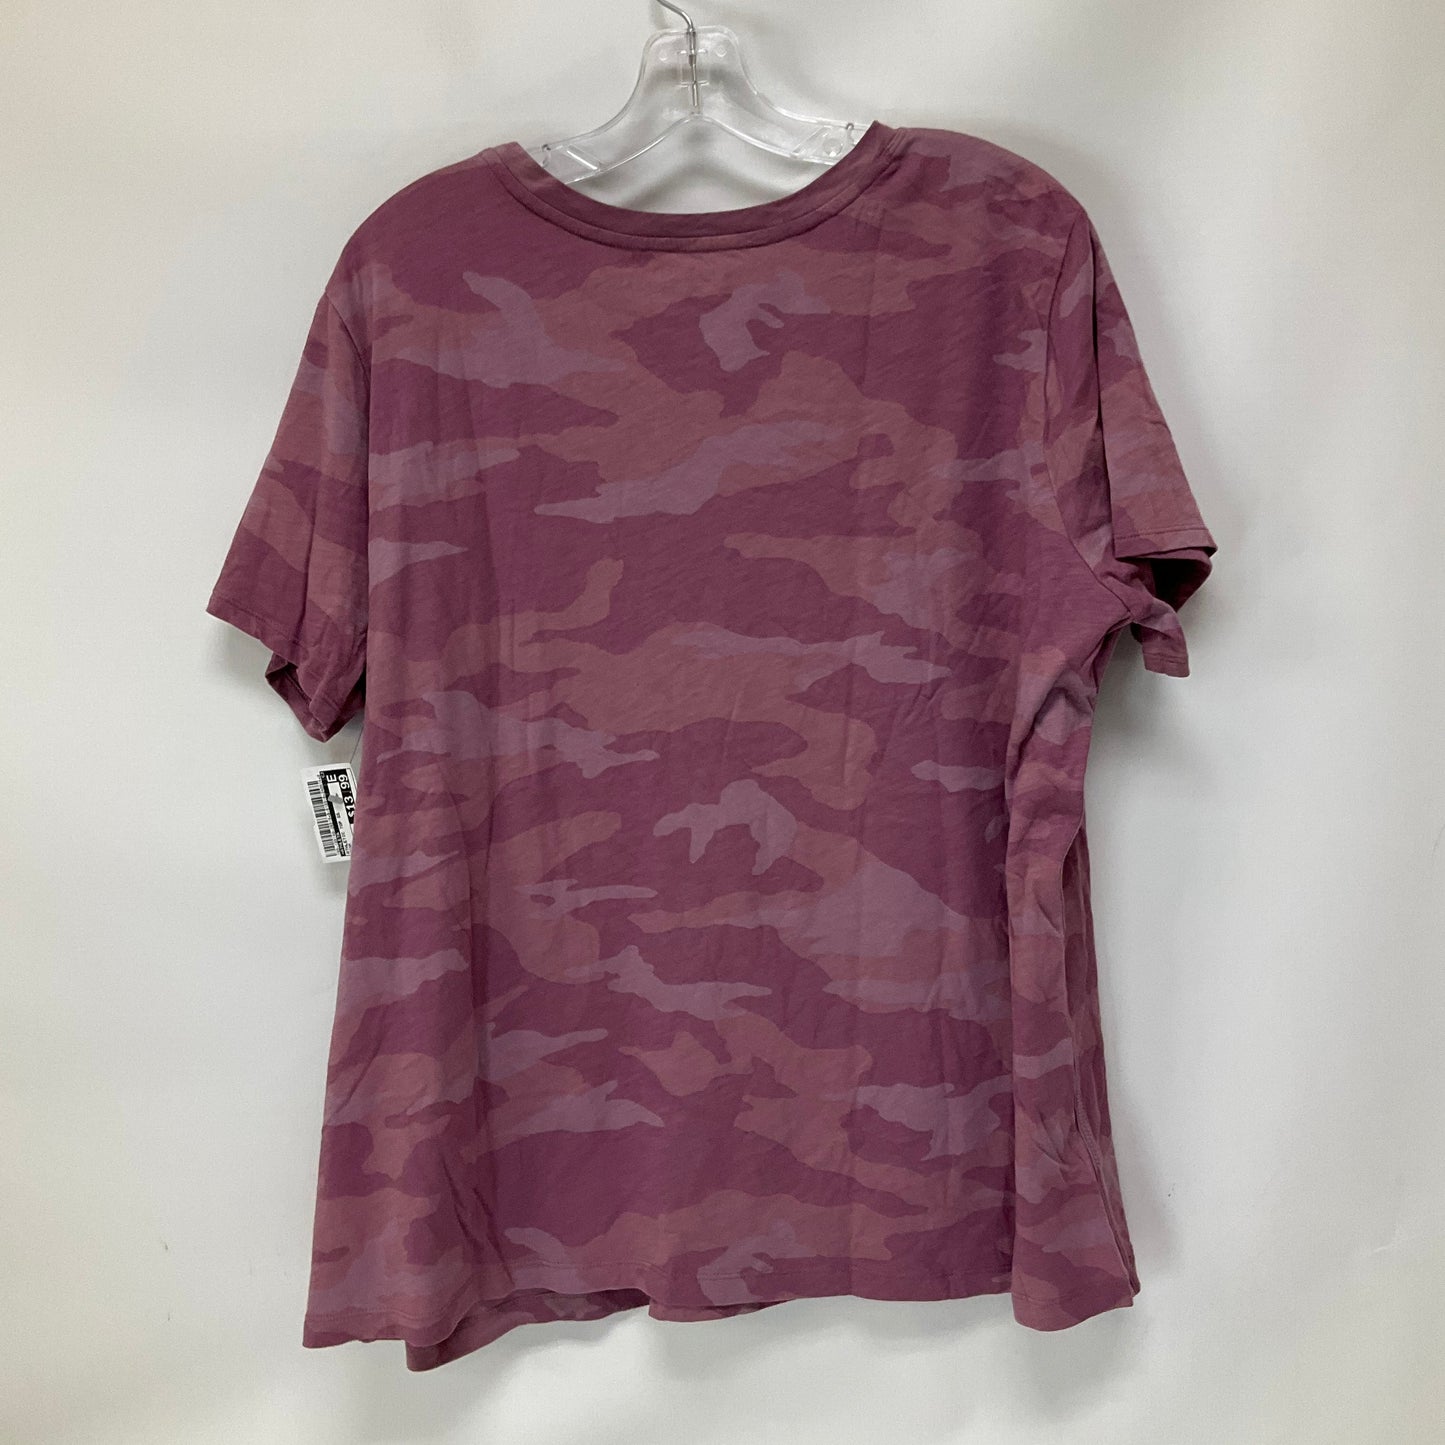 Athletic Top Short Sleeve By Athleta  Size: 2x